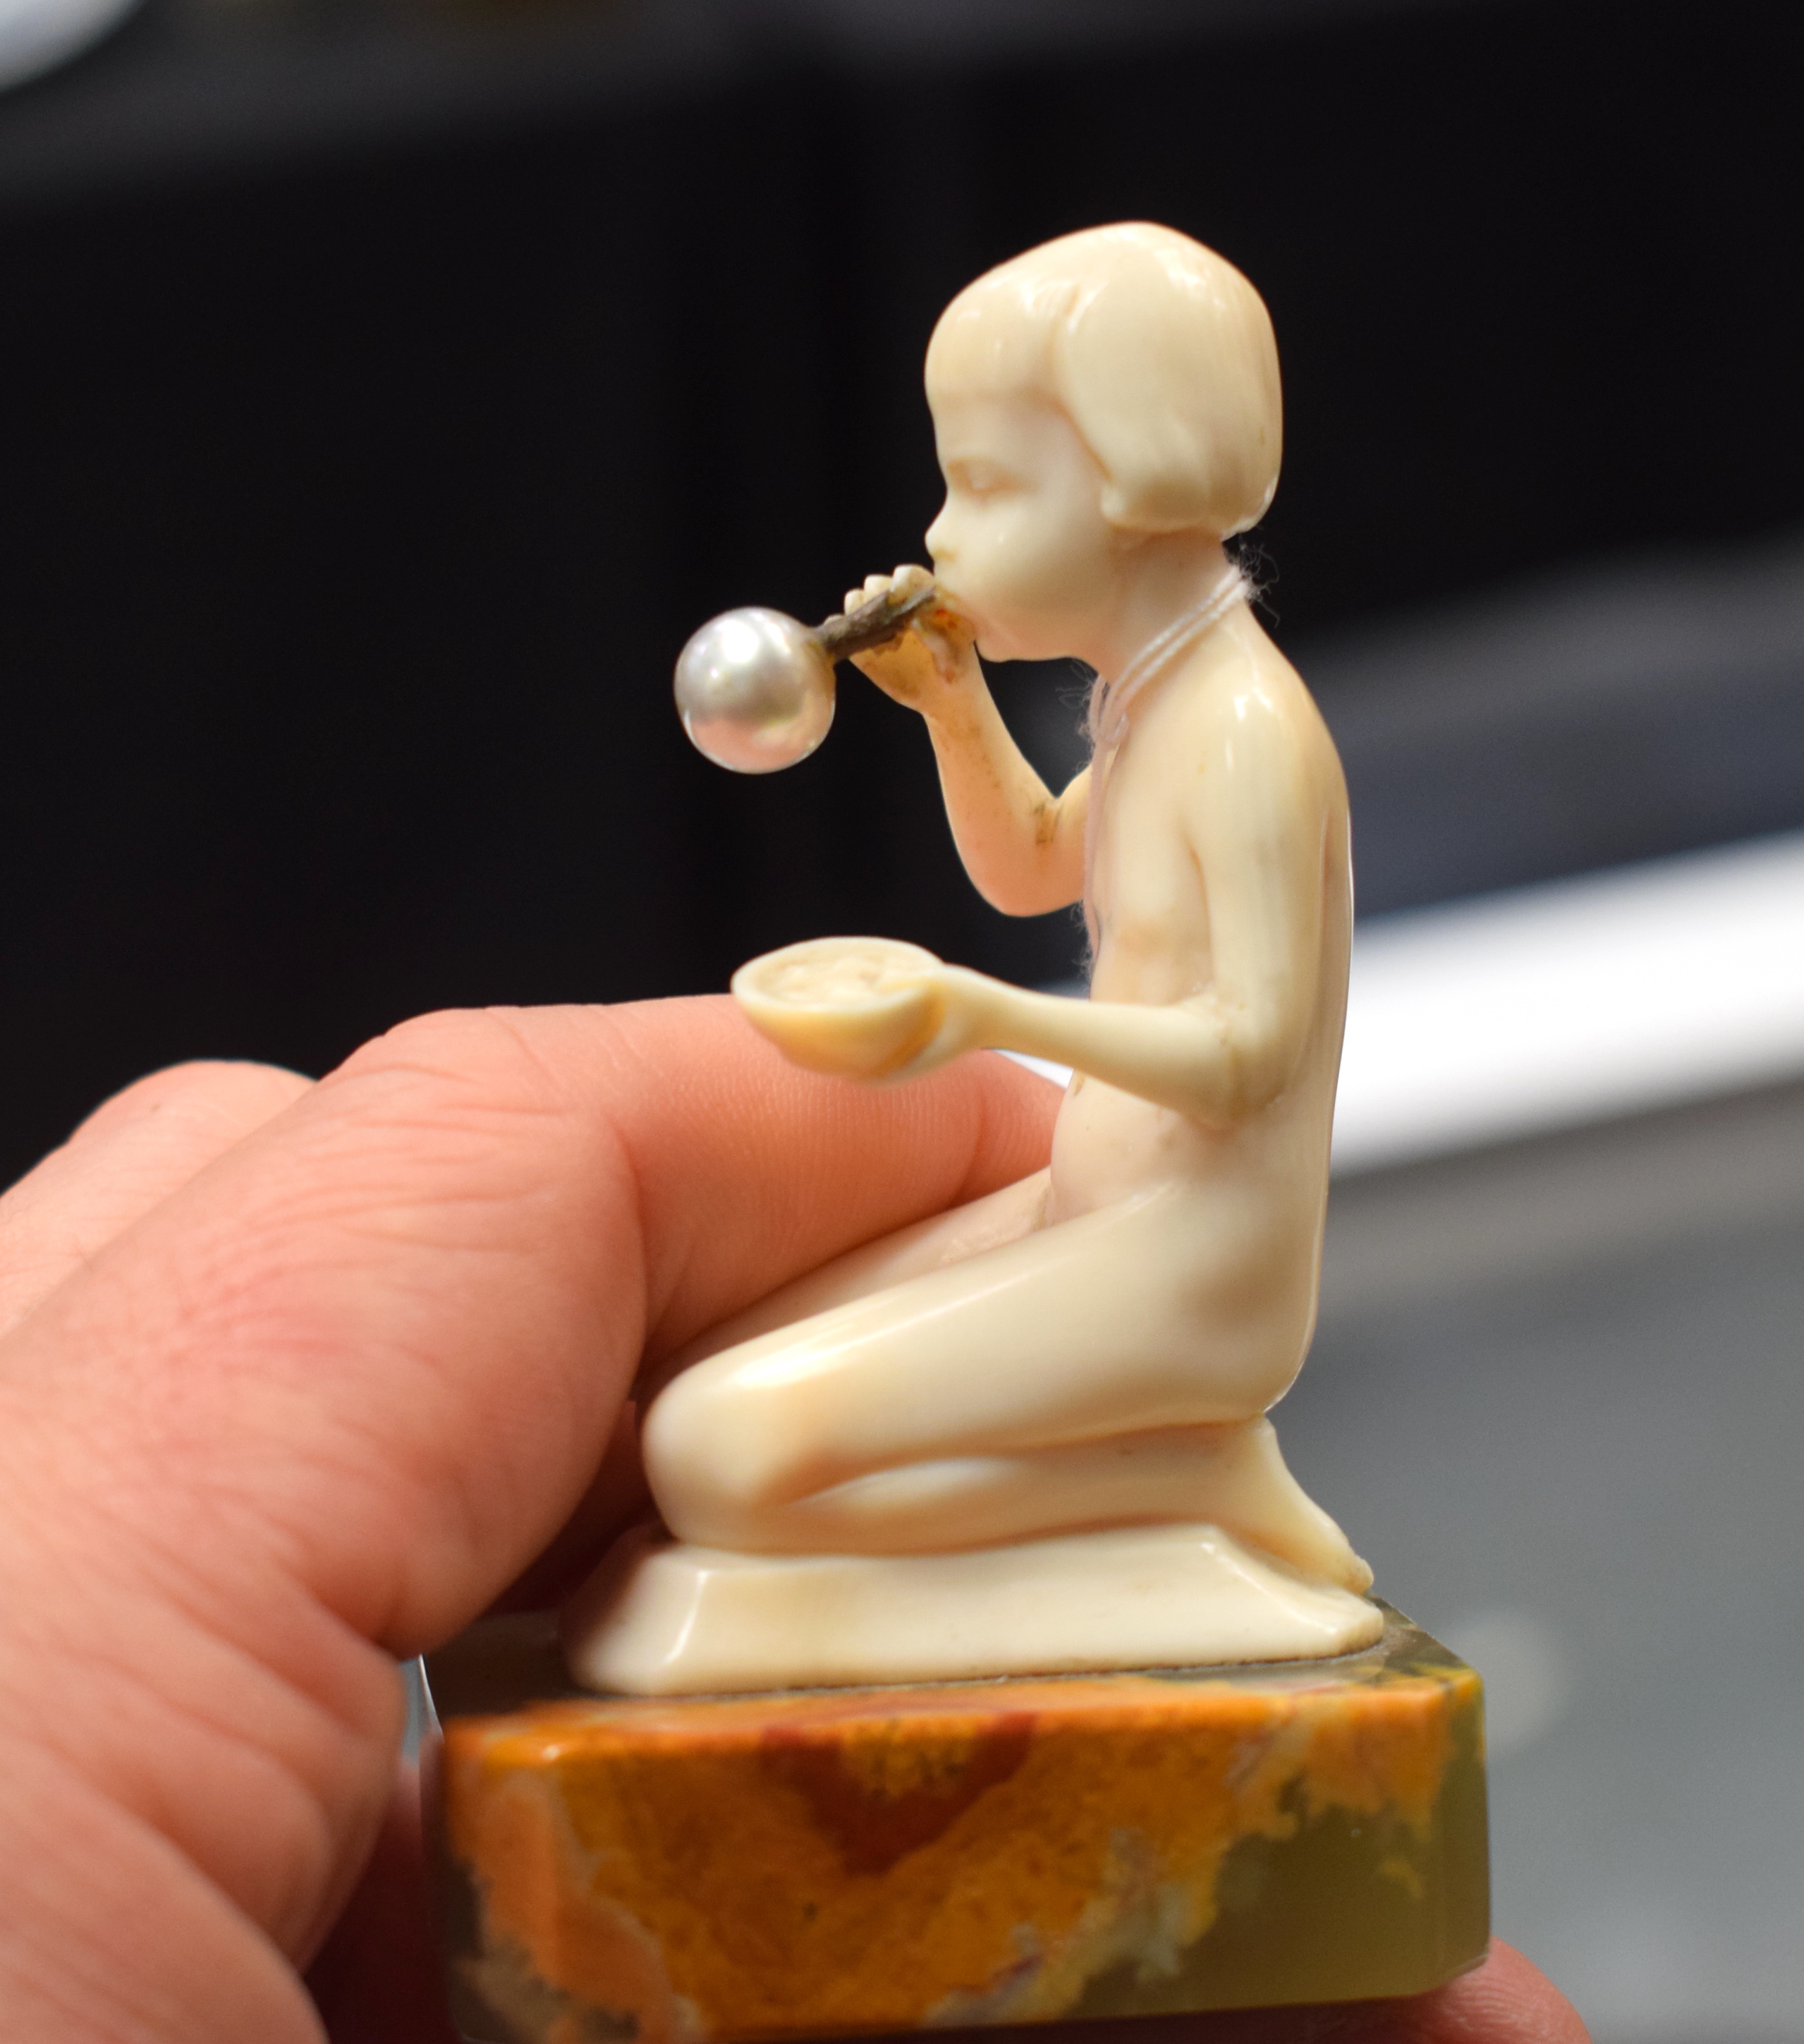 AN ART DECO CARVED IVORY FIGURE OF A BUBBLE BLOWING GIRL by Ferdinand Preiss (1882-1943), modelled - Image 5 of 11